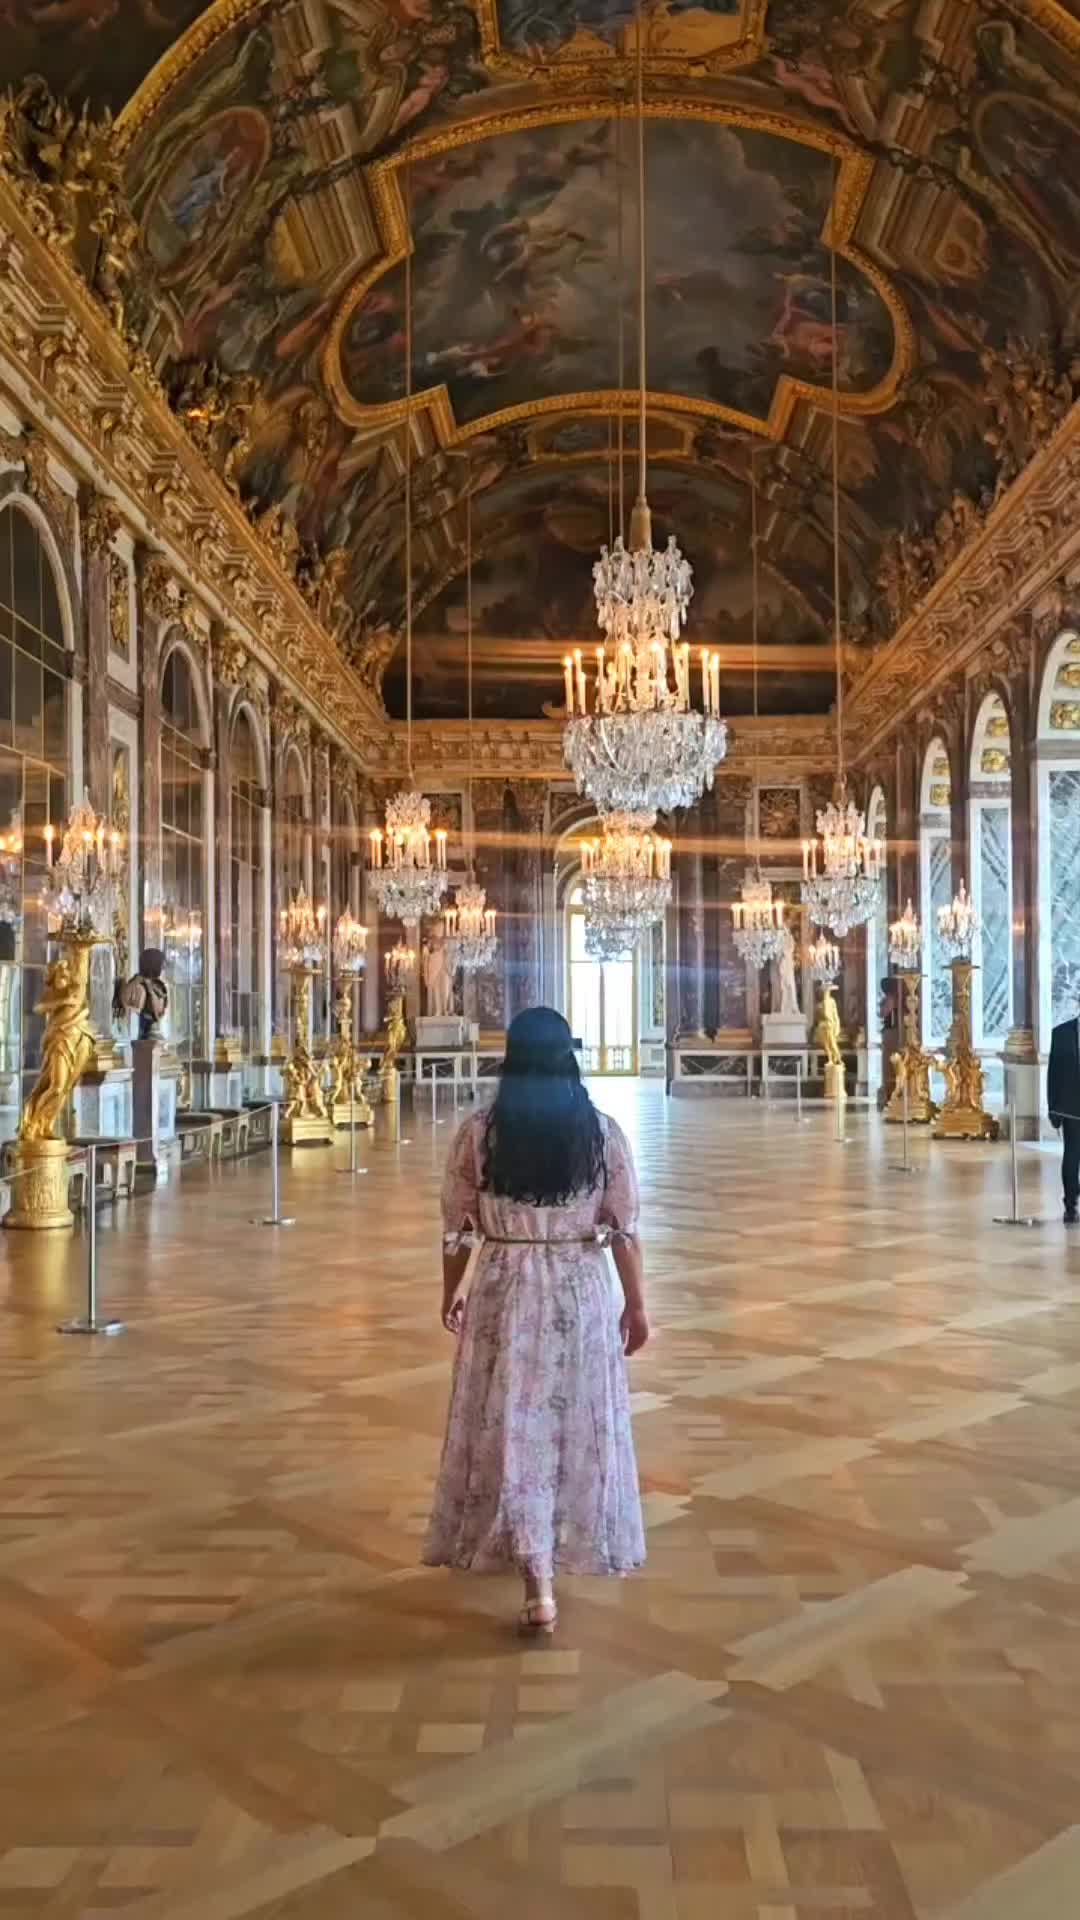 This madame is Versailles 🇫🇷
.
The Palace of Versailles was the principal residence of the French kings from the time of Louis XIV to Louis XVI.
.
The Versailles Palace is the second most popular attraction in France, after the Louvre, and has nearly 8 million visitors annually. A visit to the Palace of Versailles gives one an idea of the grandeur in which royalty lived in the 17th and 18th centuries.
.
The palace of Versailles is huge, with its 2,300 rooms spread over more than 63,000 square meters. Make sure you don’t miss the King’s state and private apartments, the Hall of Mirrors, and the Gallery of the Great Battles, in addition to the Trianon Palace and the Queen’s Hamlet. 
.
📍My tip : do an online reservation for the opening hour and enjoy the Palace before it gets too crowded.
.
.
#parisfrance #parisversailles #versaillespalace #pariscity